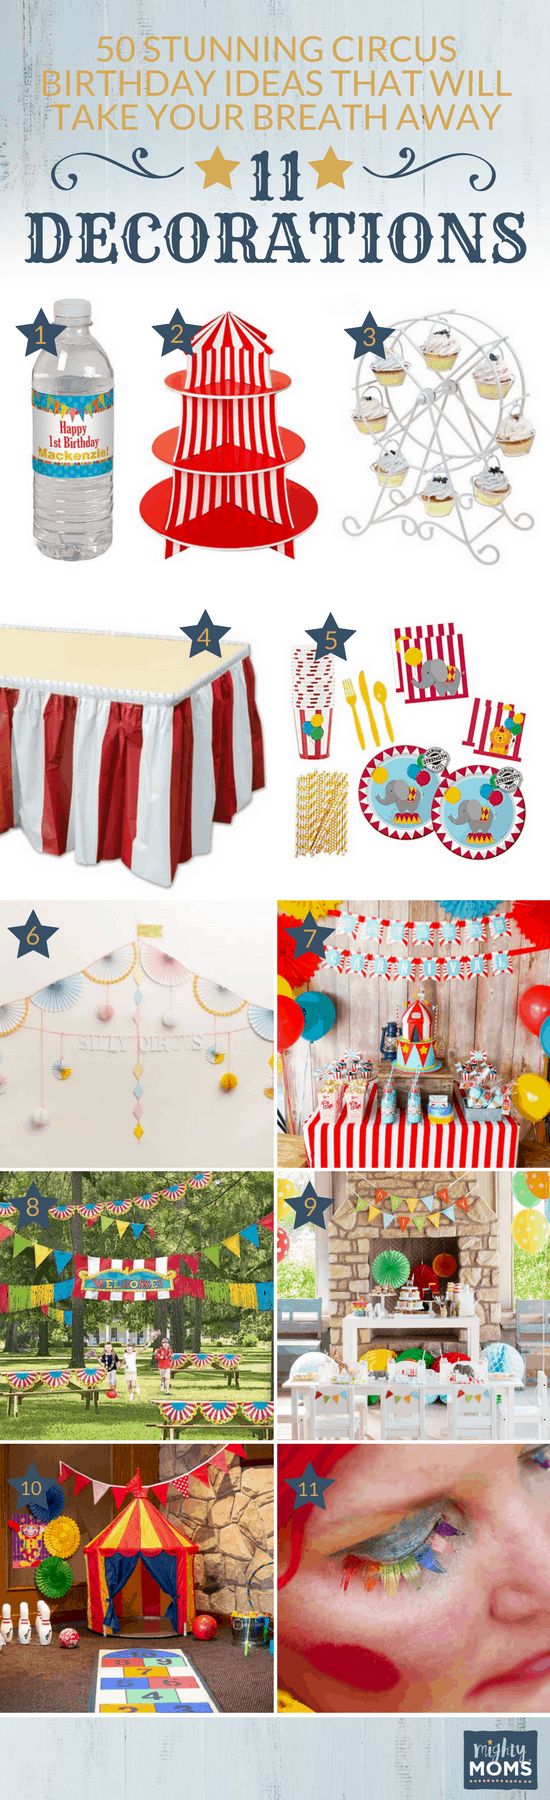 50 Stunning Circus Birthday Ideas That will Take Your Breath Away - MightyMoms.club